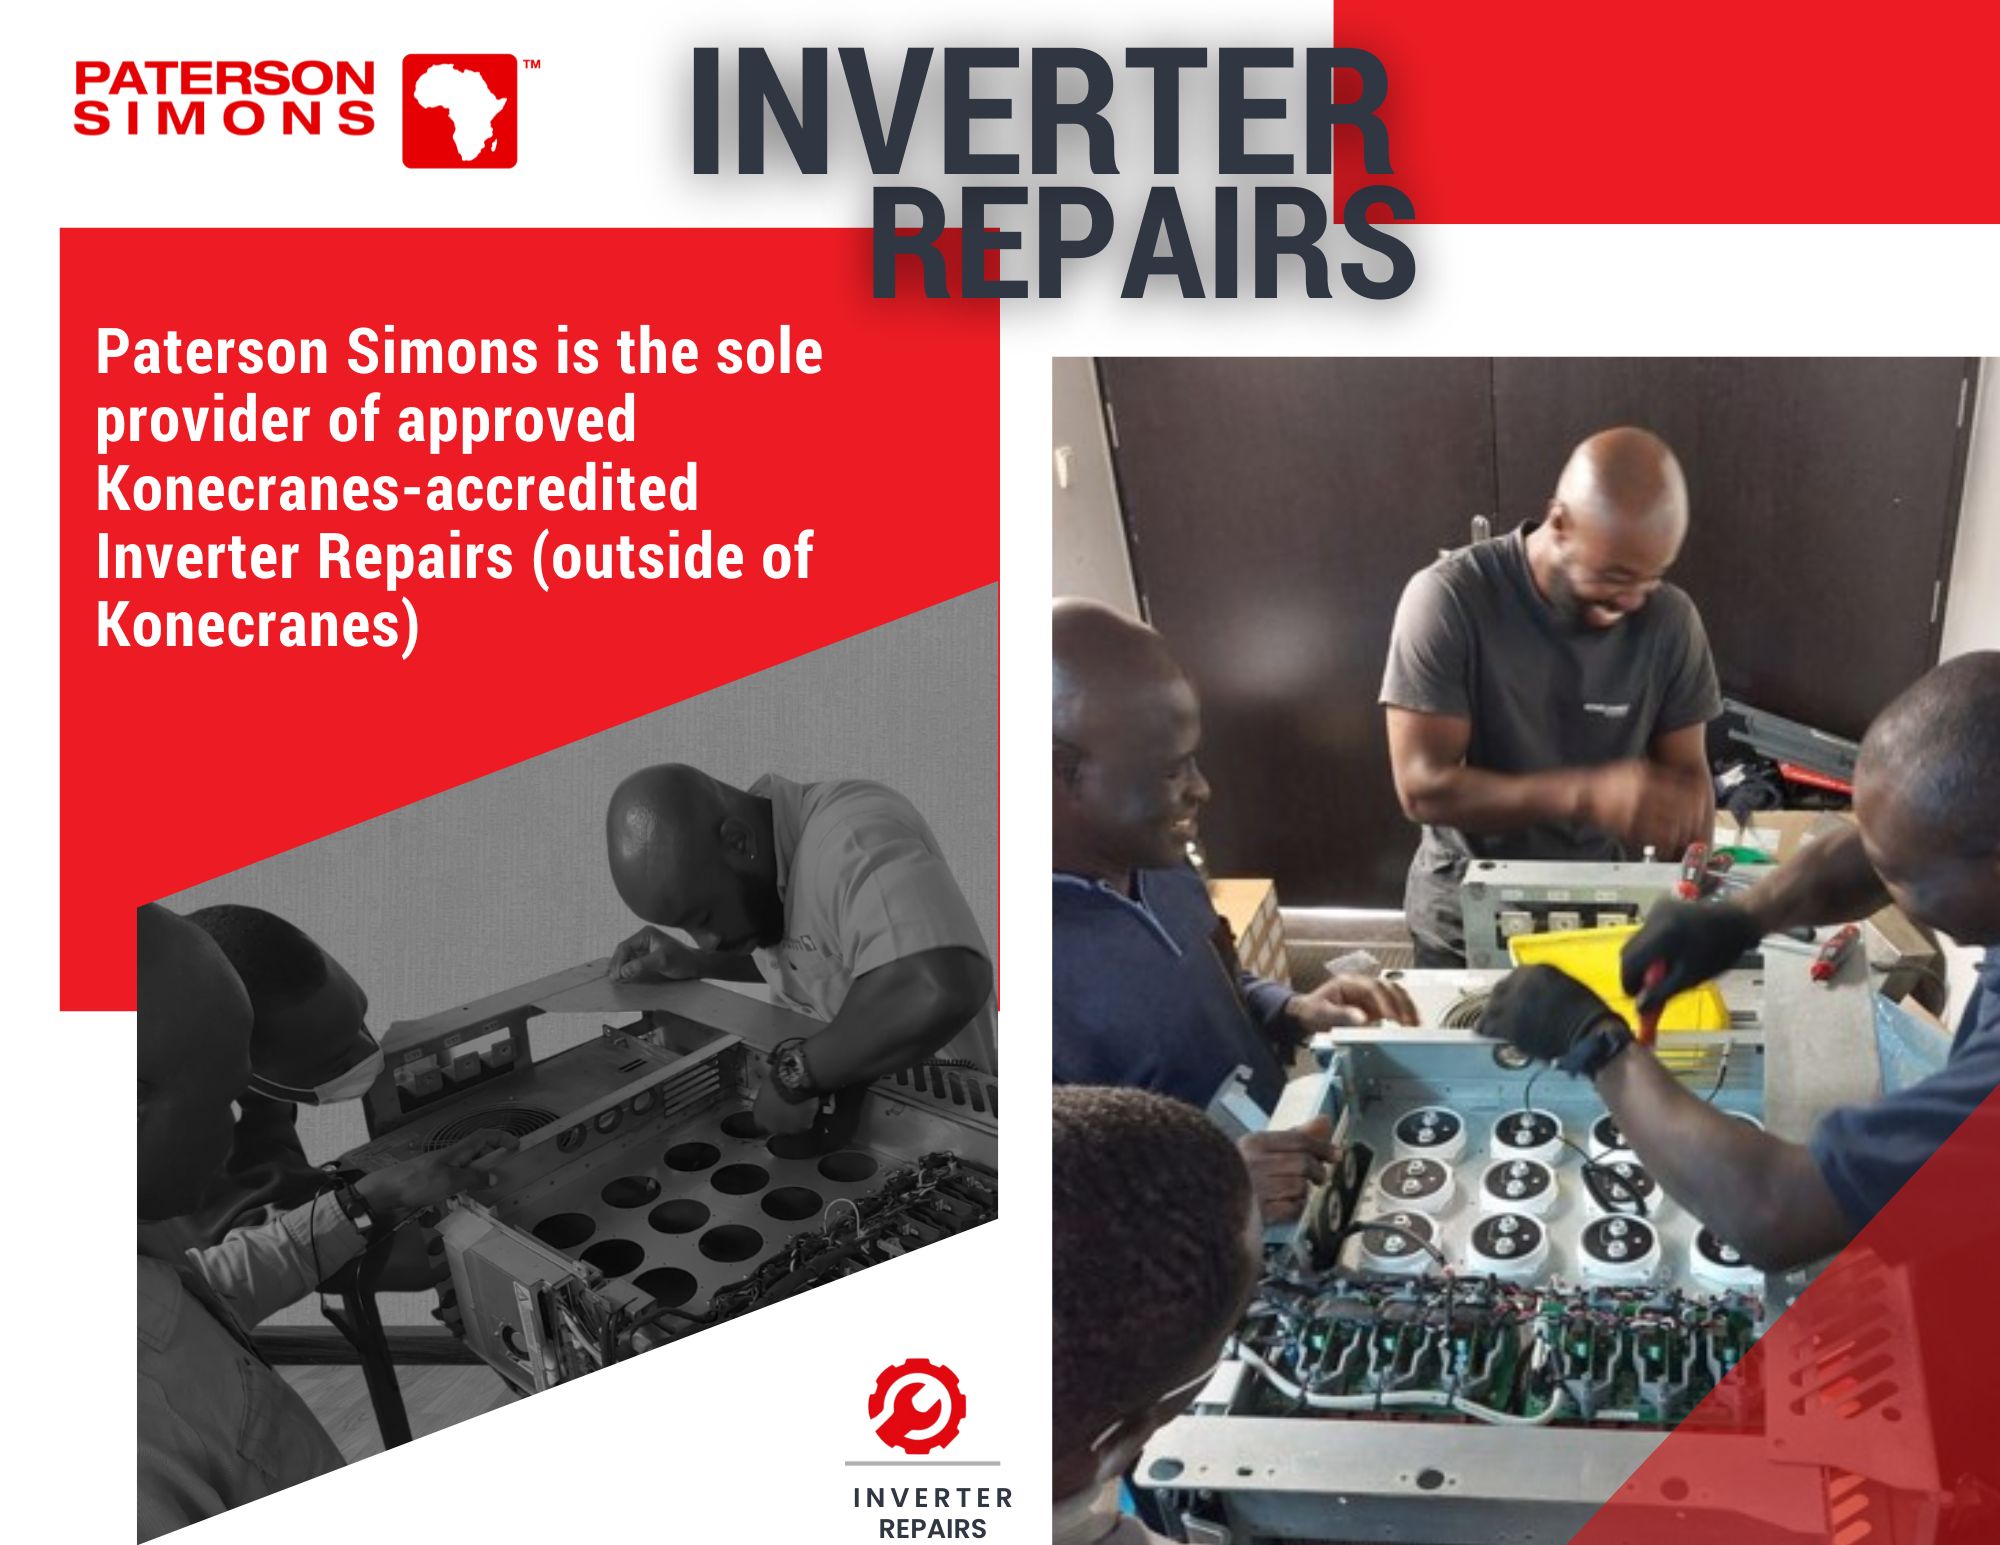 WE OFFER APPROVED KONECRANES-ACCREDITED INVERTER REPAIRS